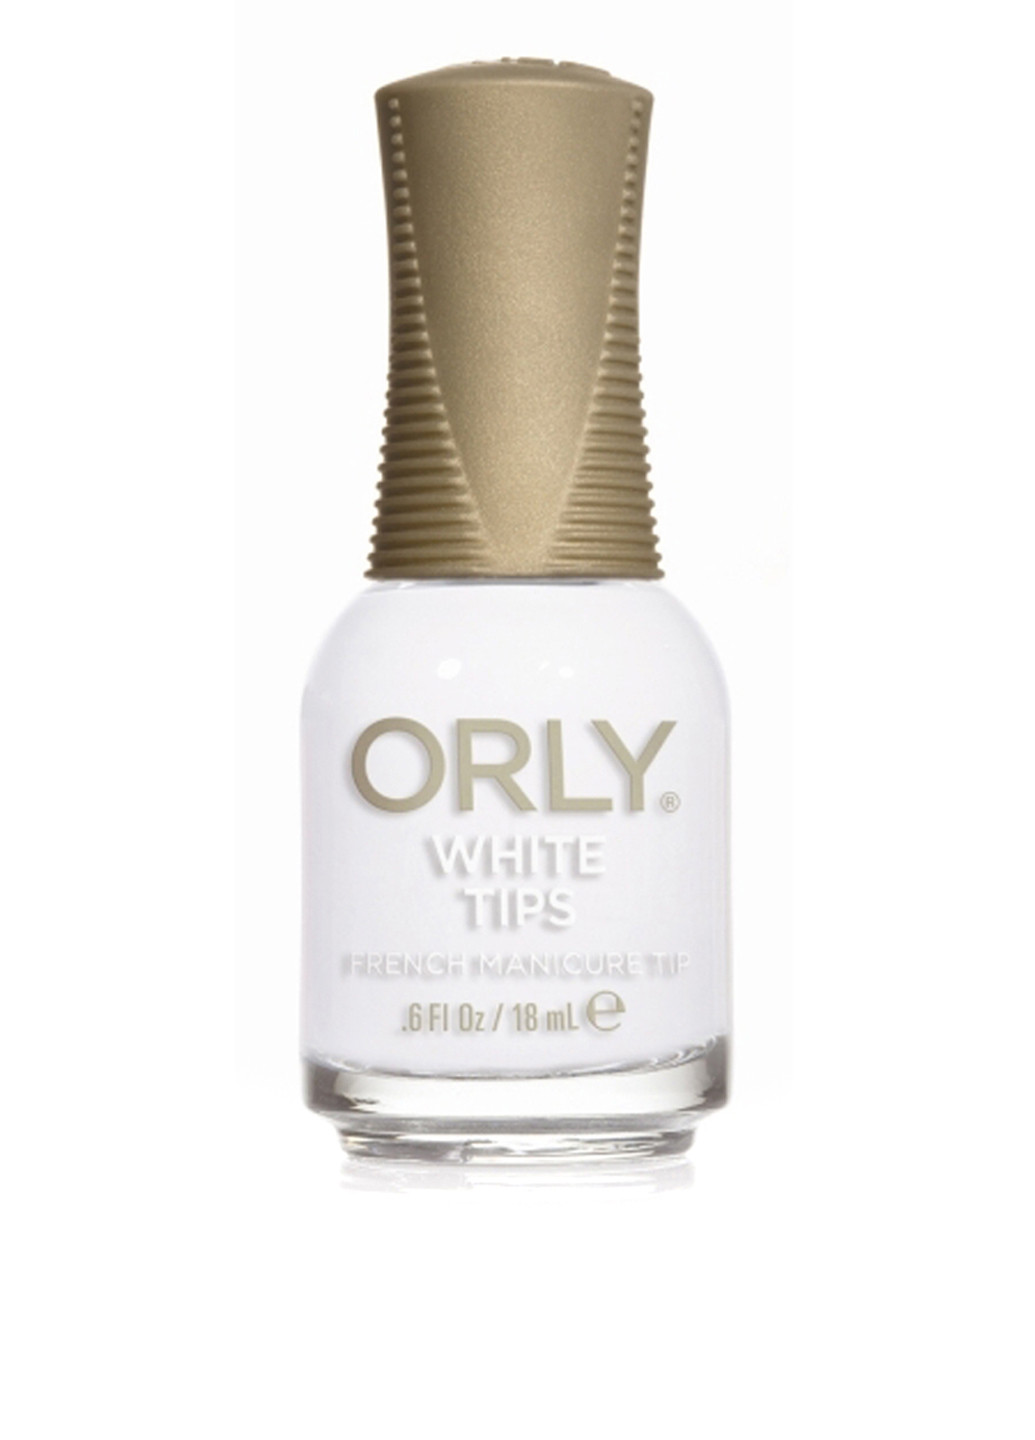 Лак для французского маникюра Nail French Manicure №22001 White Tips Orly (83244697)